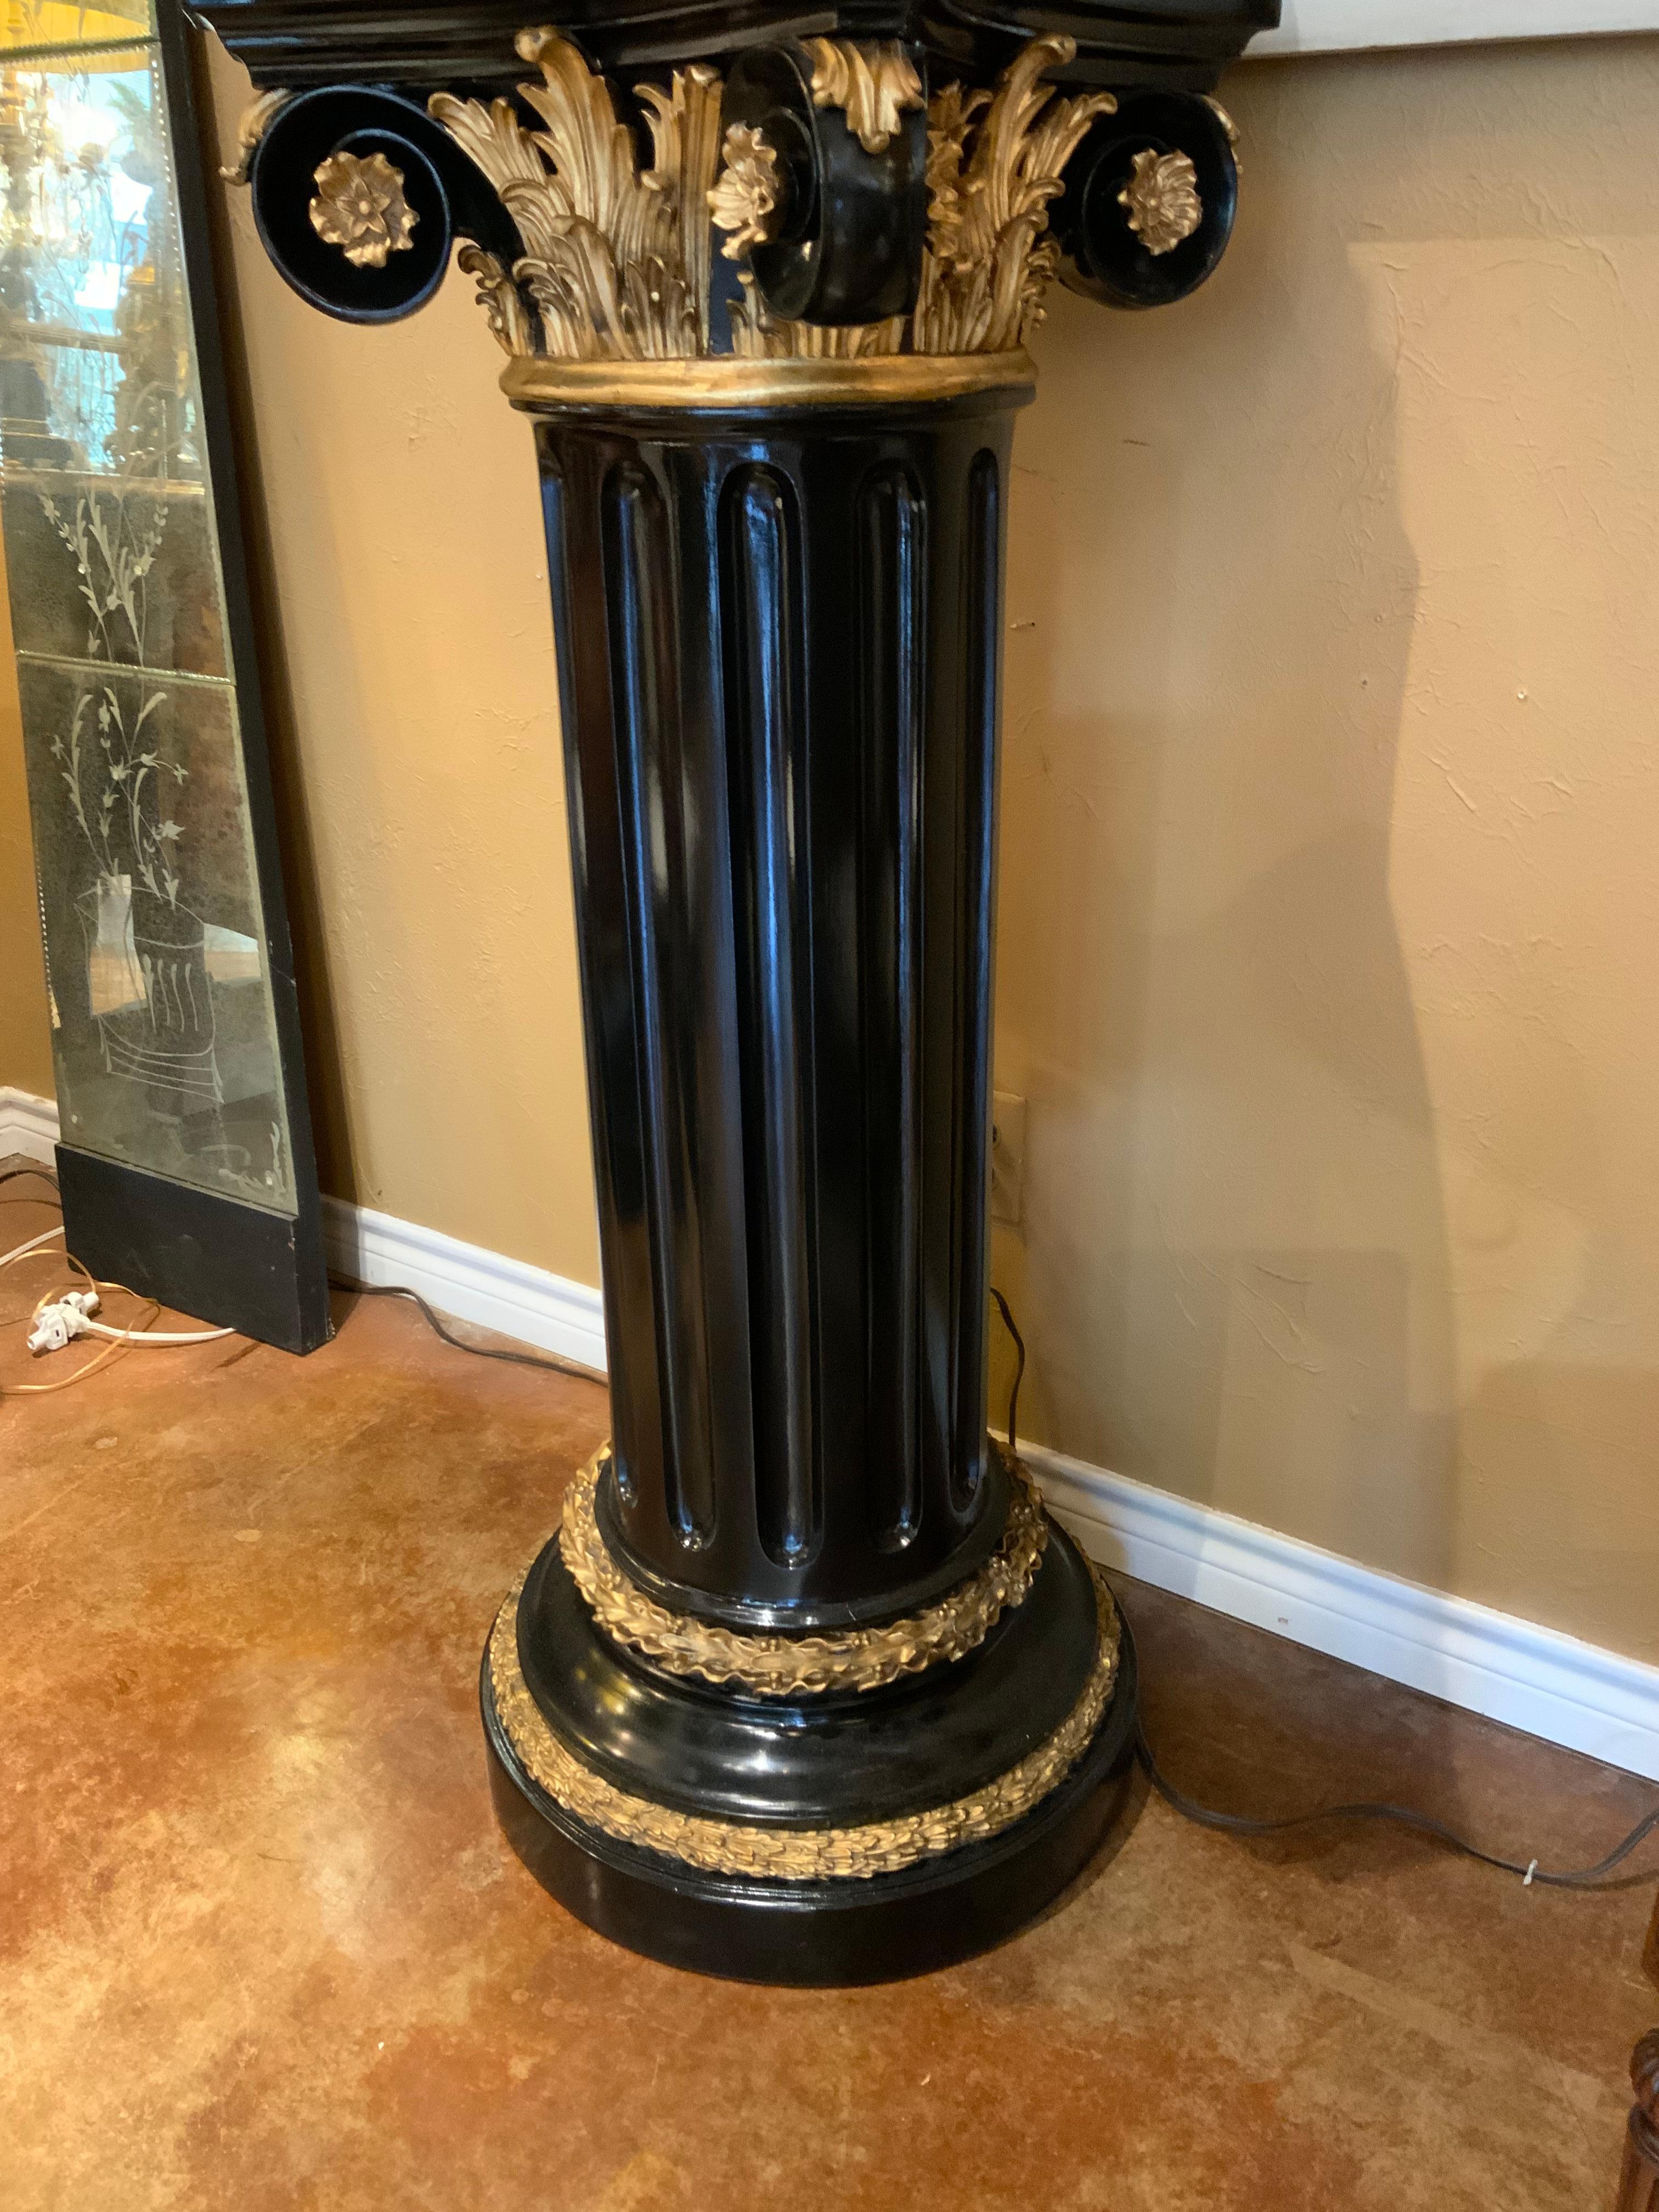 Polychromed pedestal in black with gilt accents on the upper supports and
On the base.